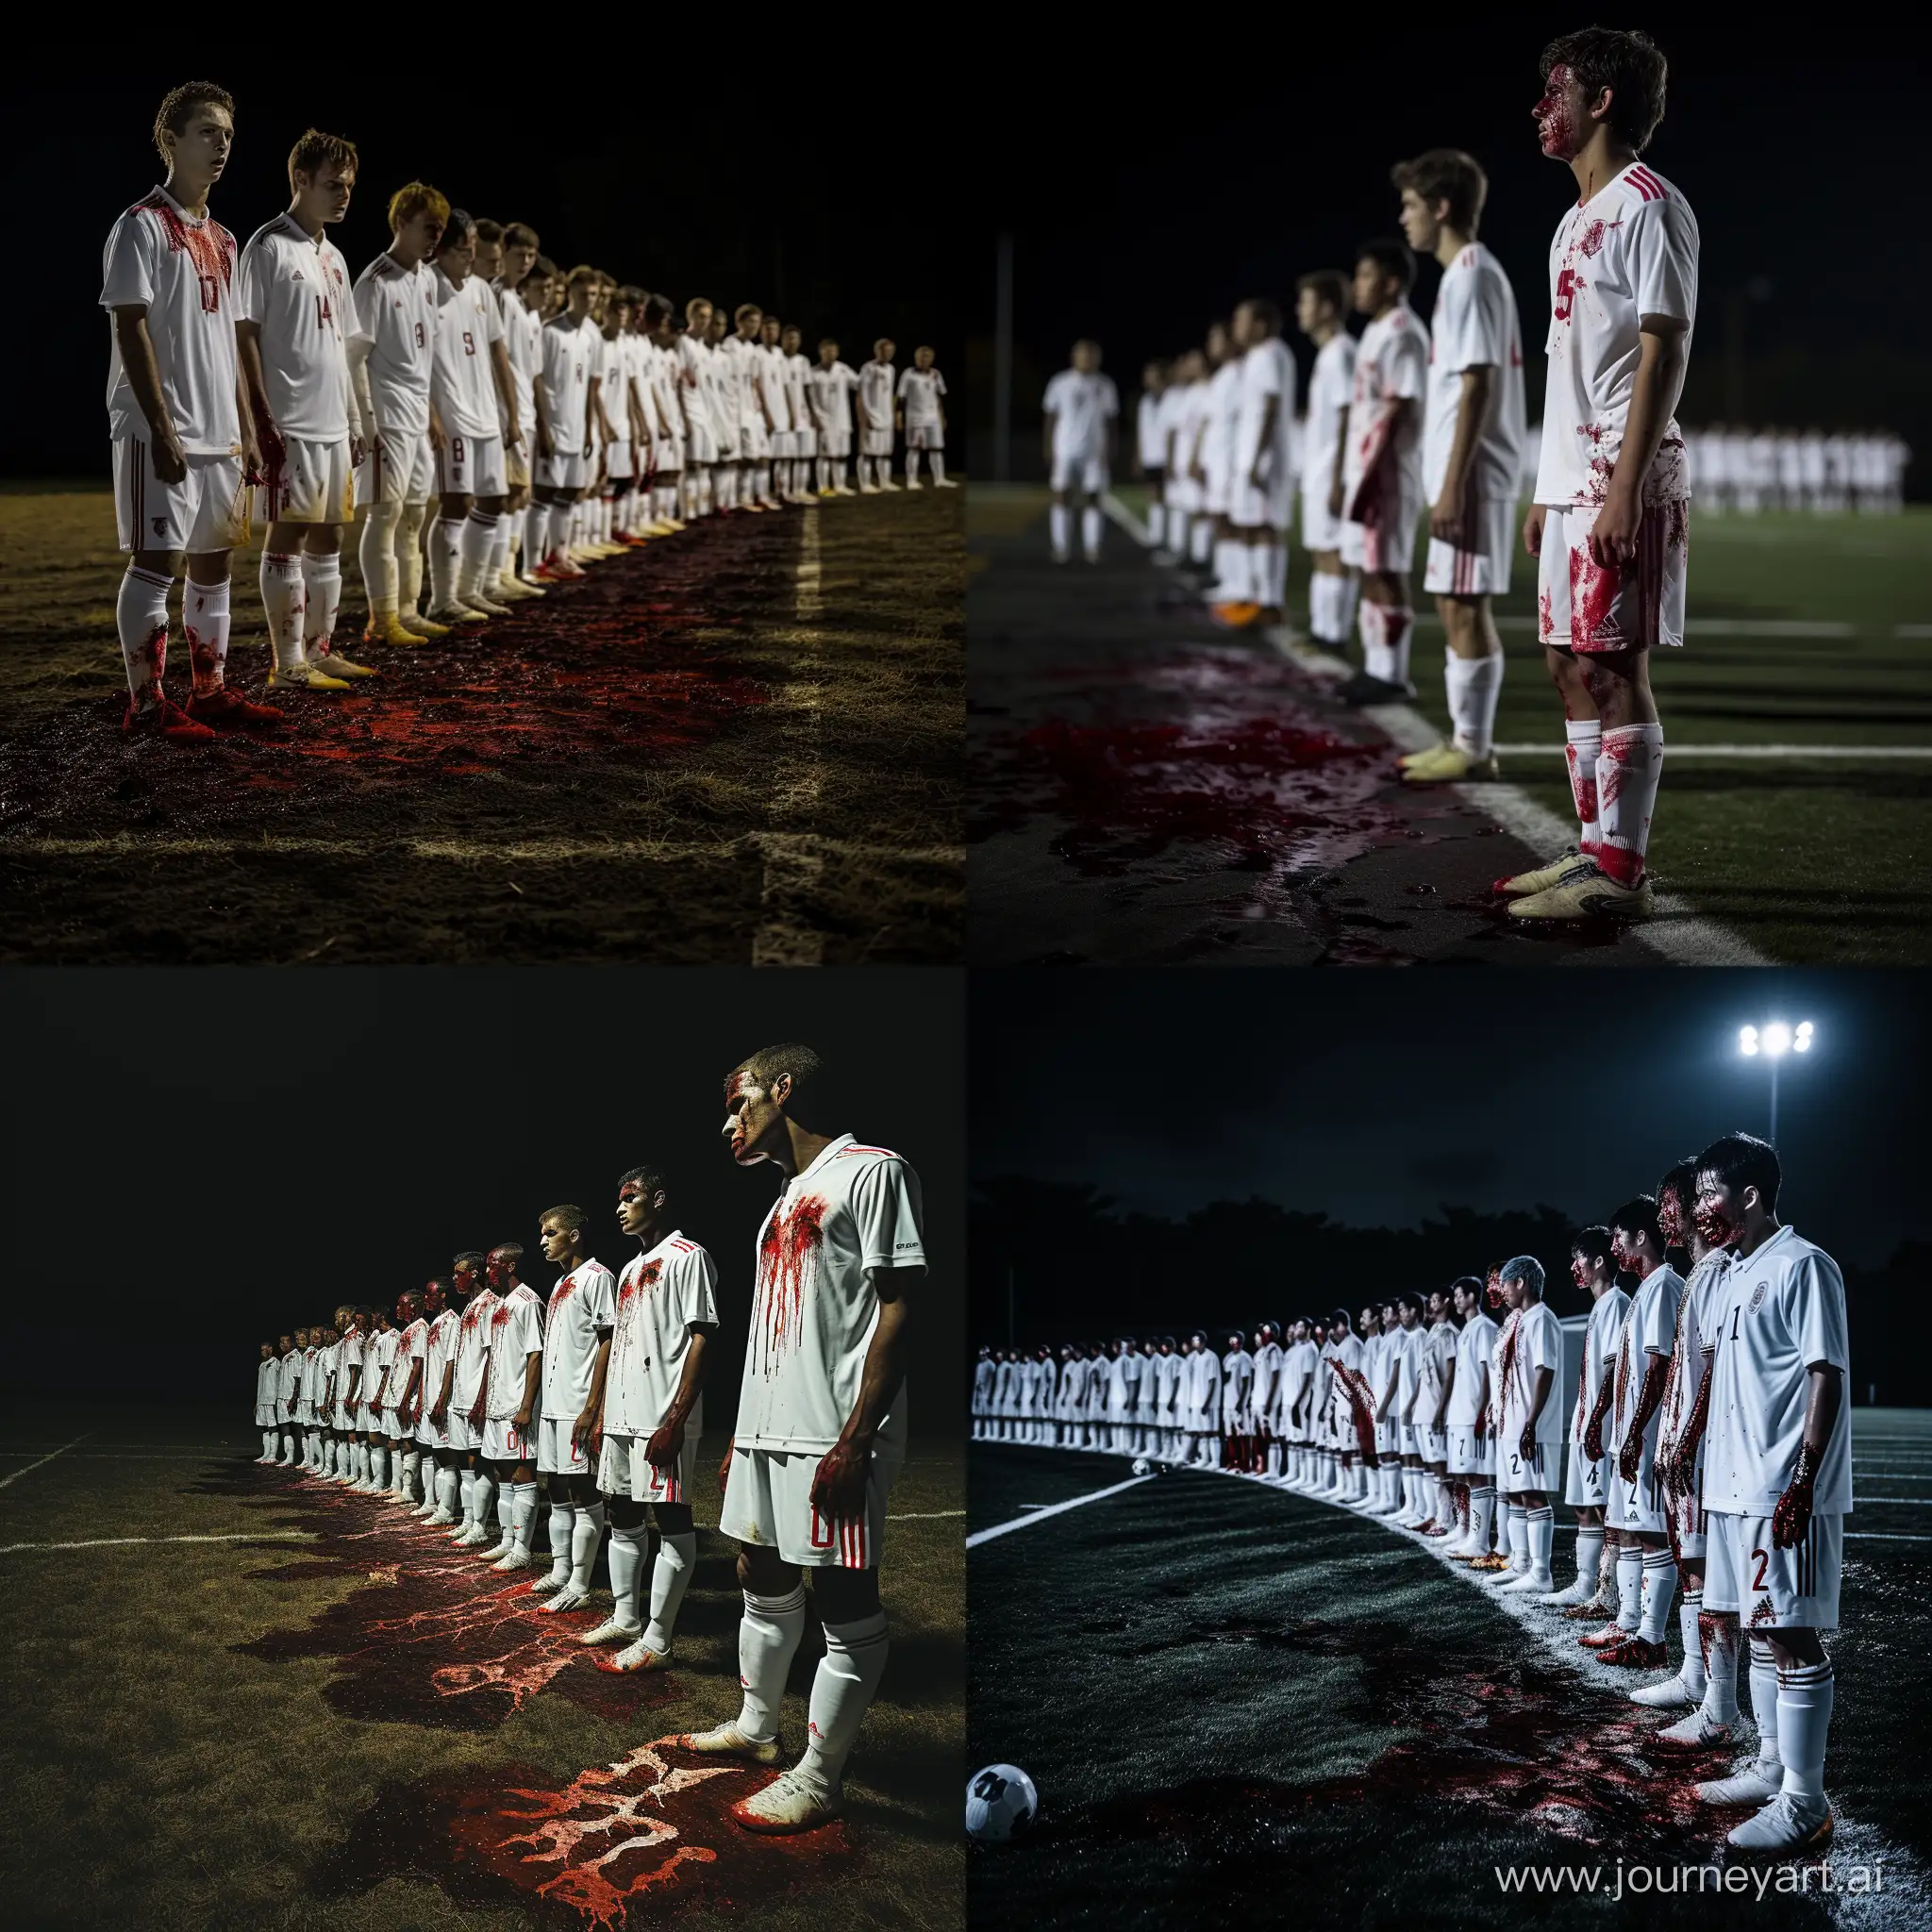 Intense-Soccer-Team-in-Striking-White-and-BloodStained-Uniforms-on-Dark-Field